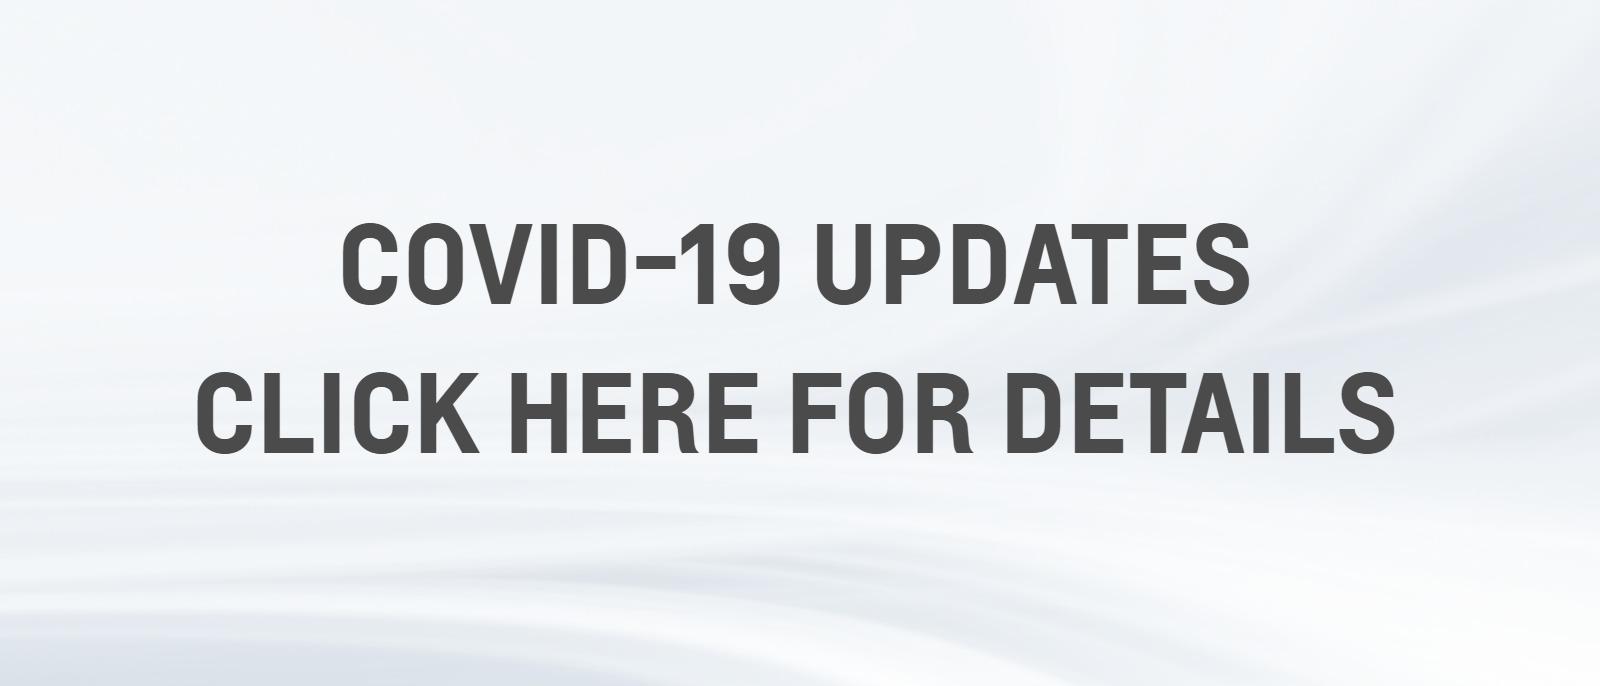 COVID-19 Updates – Click here for details